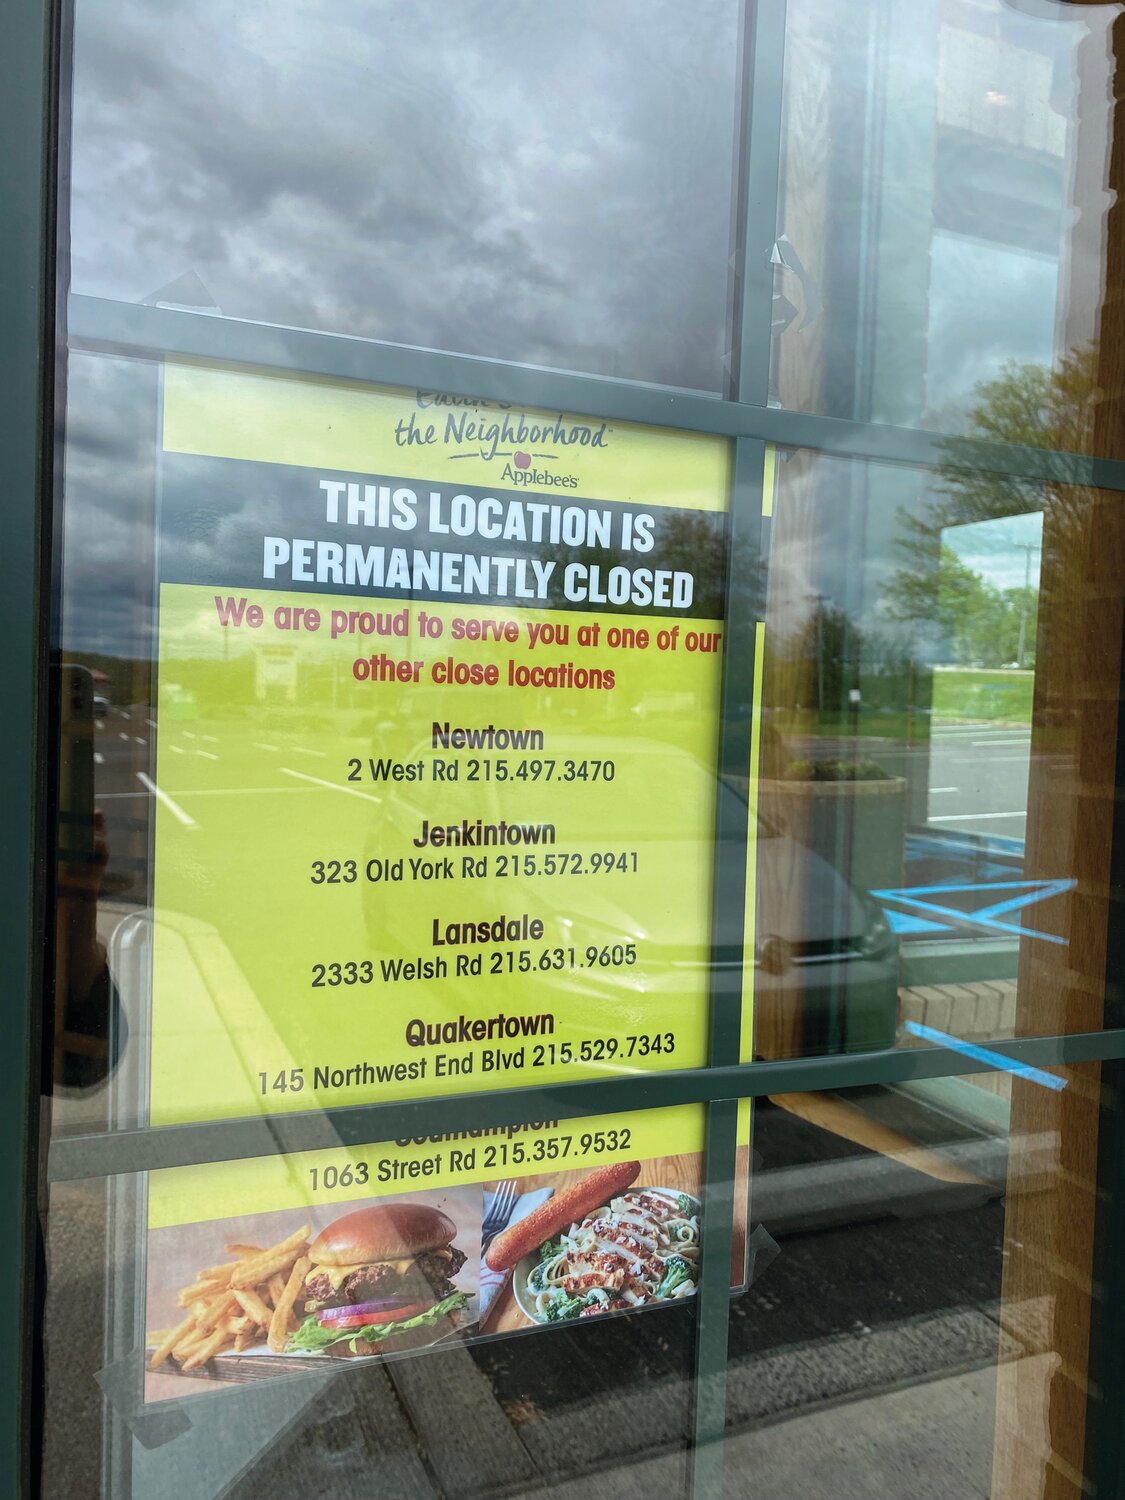 The Doylestown Applebee’s Grill + Bar, a fixture in the Barn Plaza shopping center for 25 years, has closed.